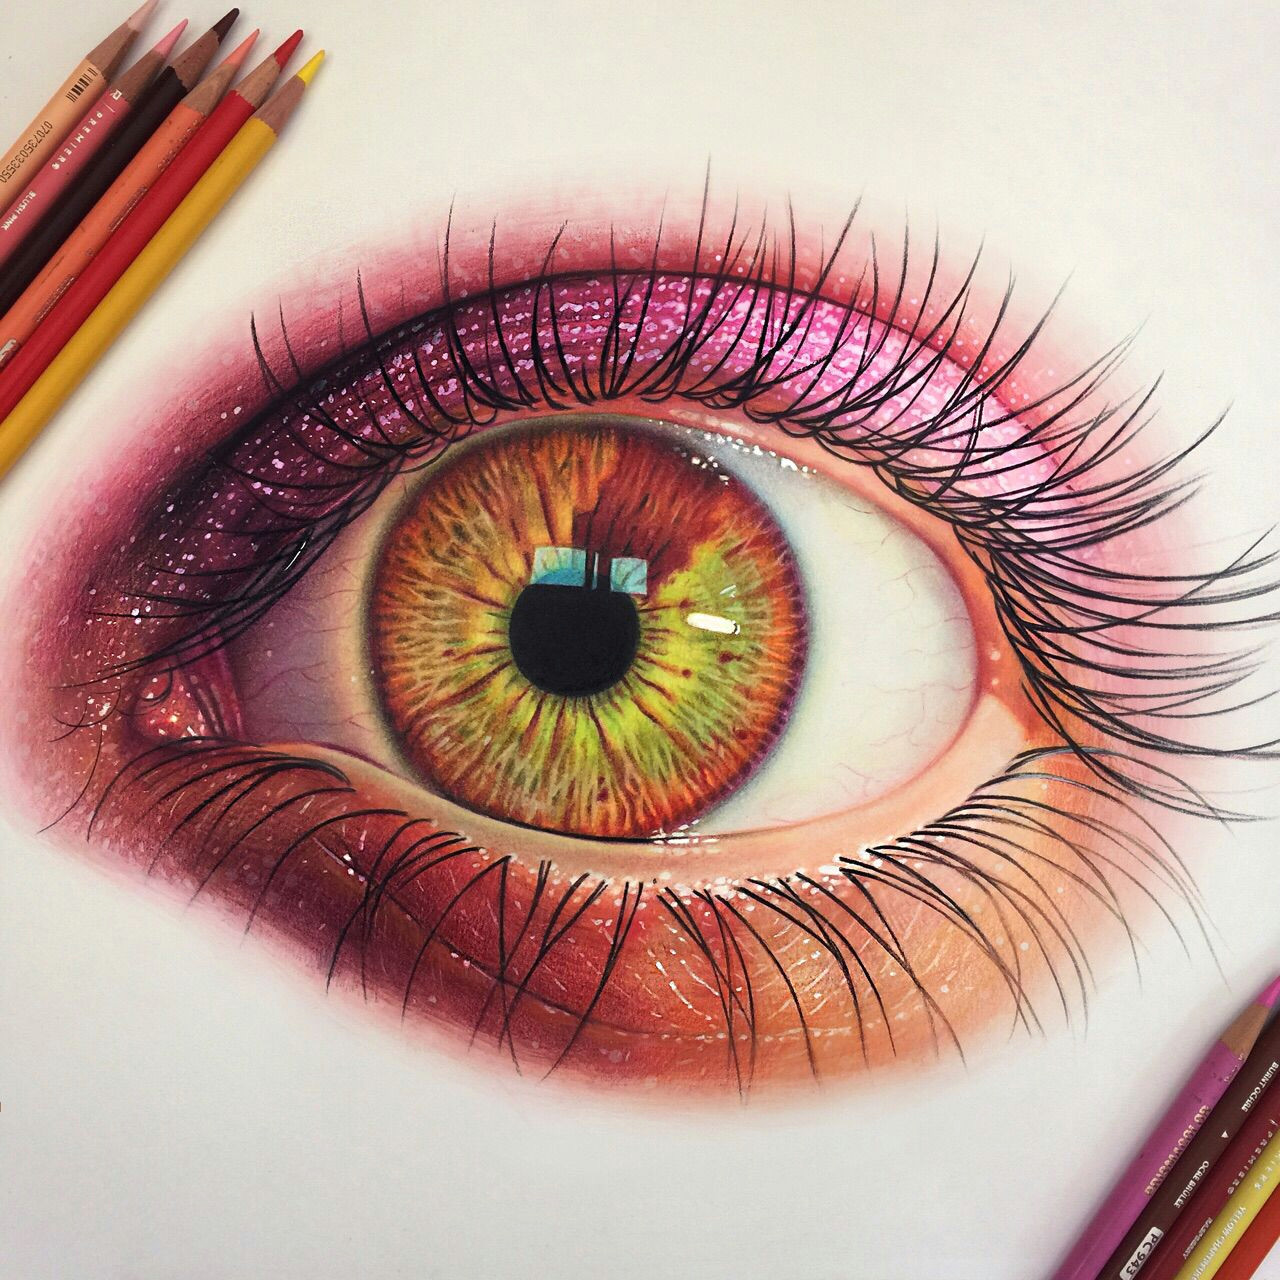 Drawings Of Eyes In Color 25 Stunning and Realistic Color Pencil Drawings by Morgan Davidson